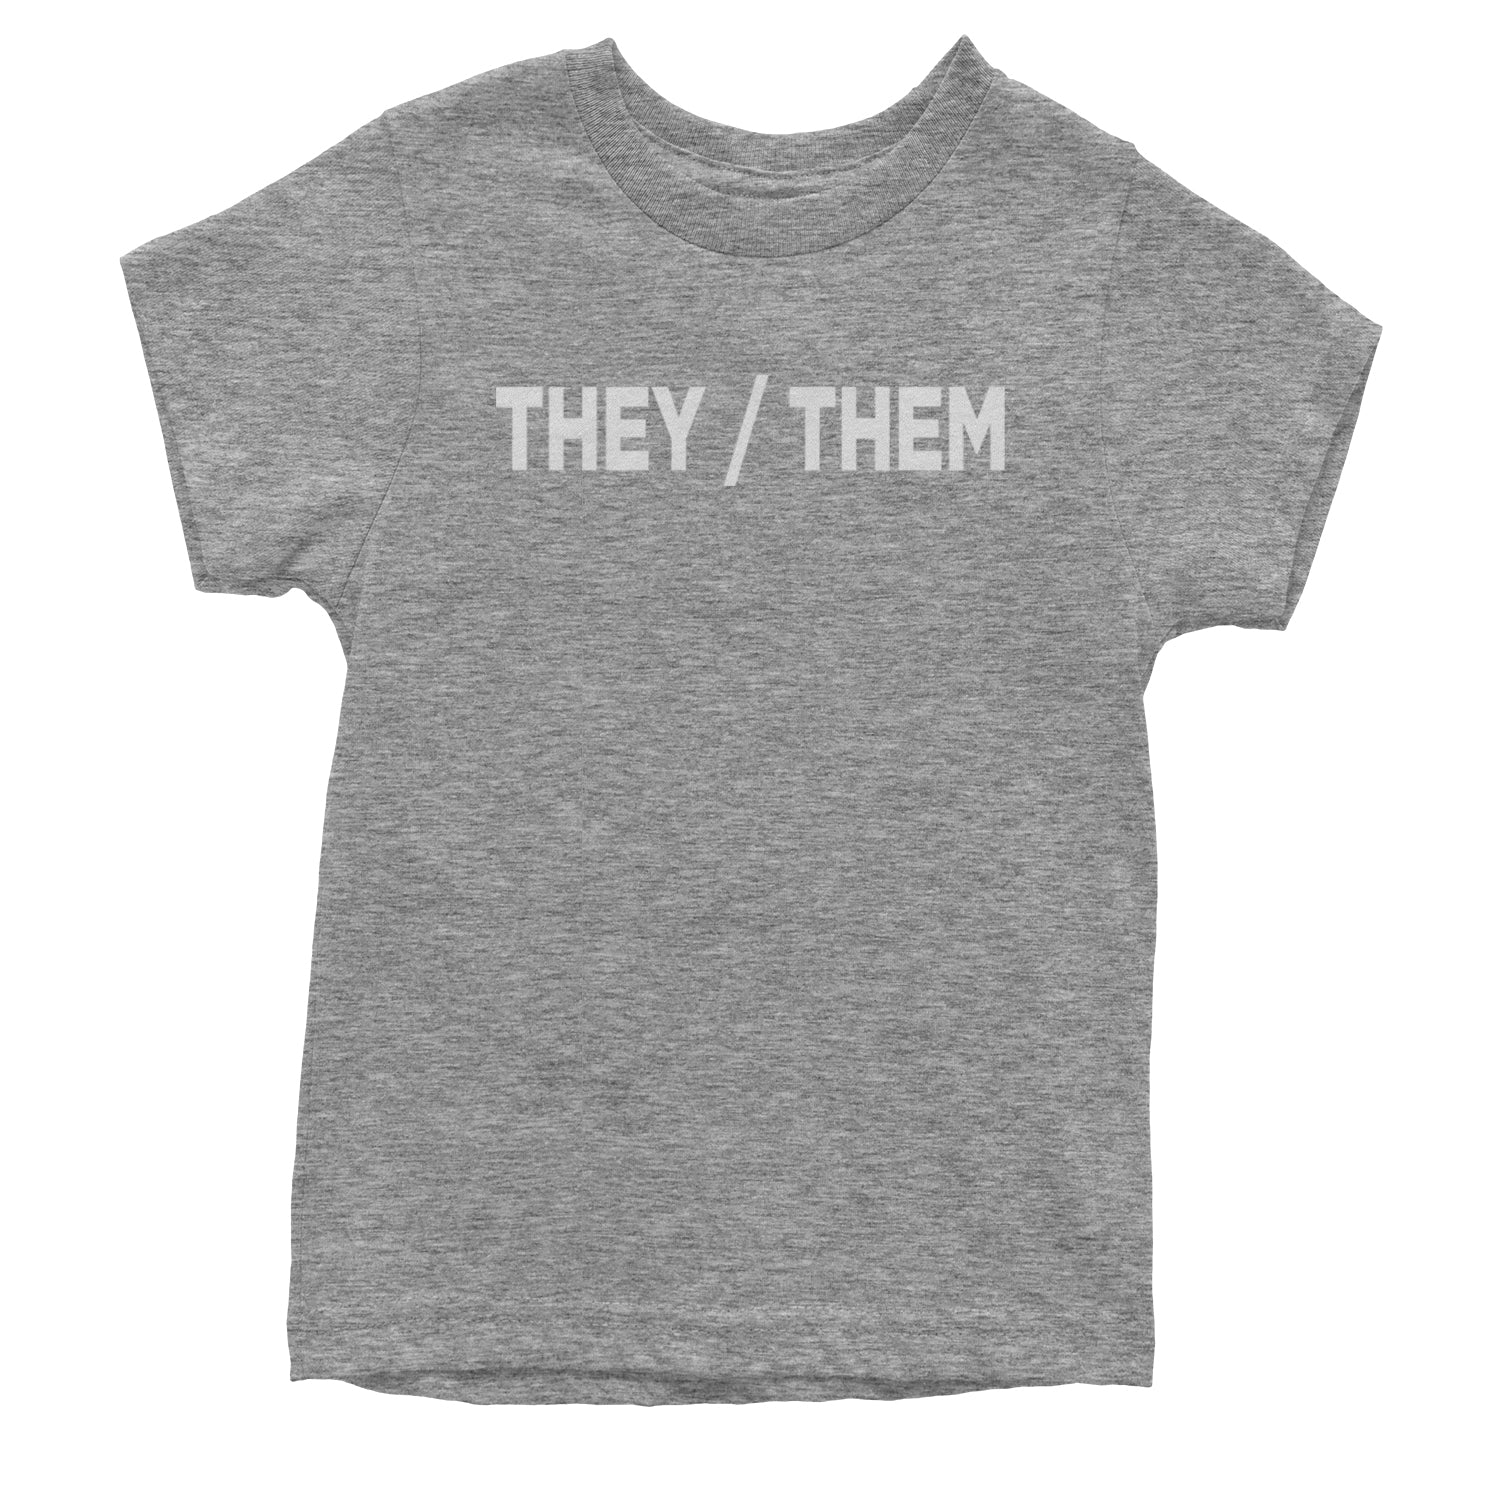 They Them Gender Pronouns Diversity and Inclusion Youth T-shirt binary, civil, gay, he, her, him, nonbinary, pride, rights, she, them, they by Expression Tees